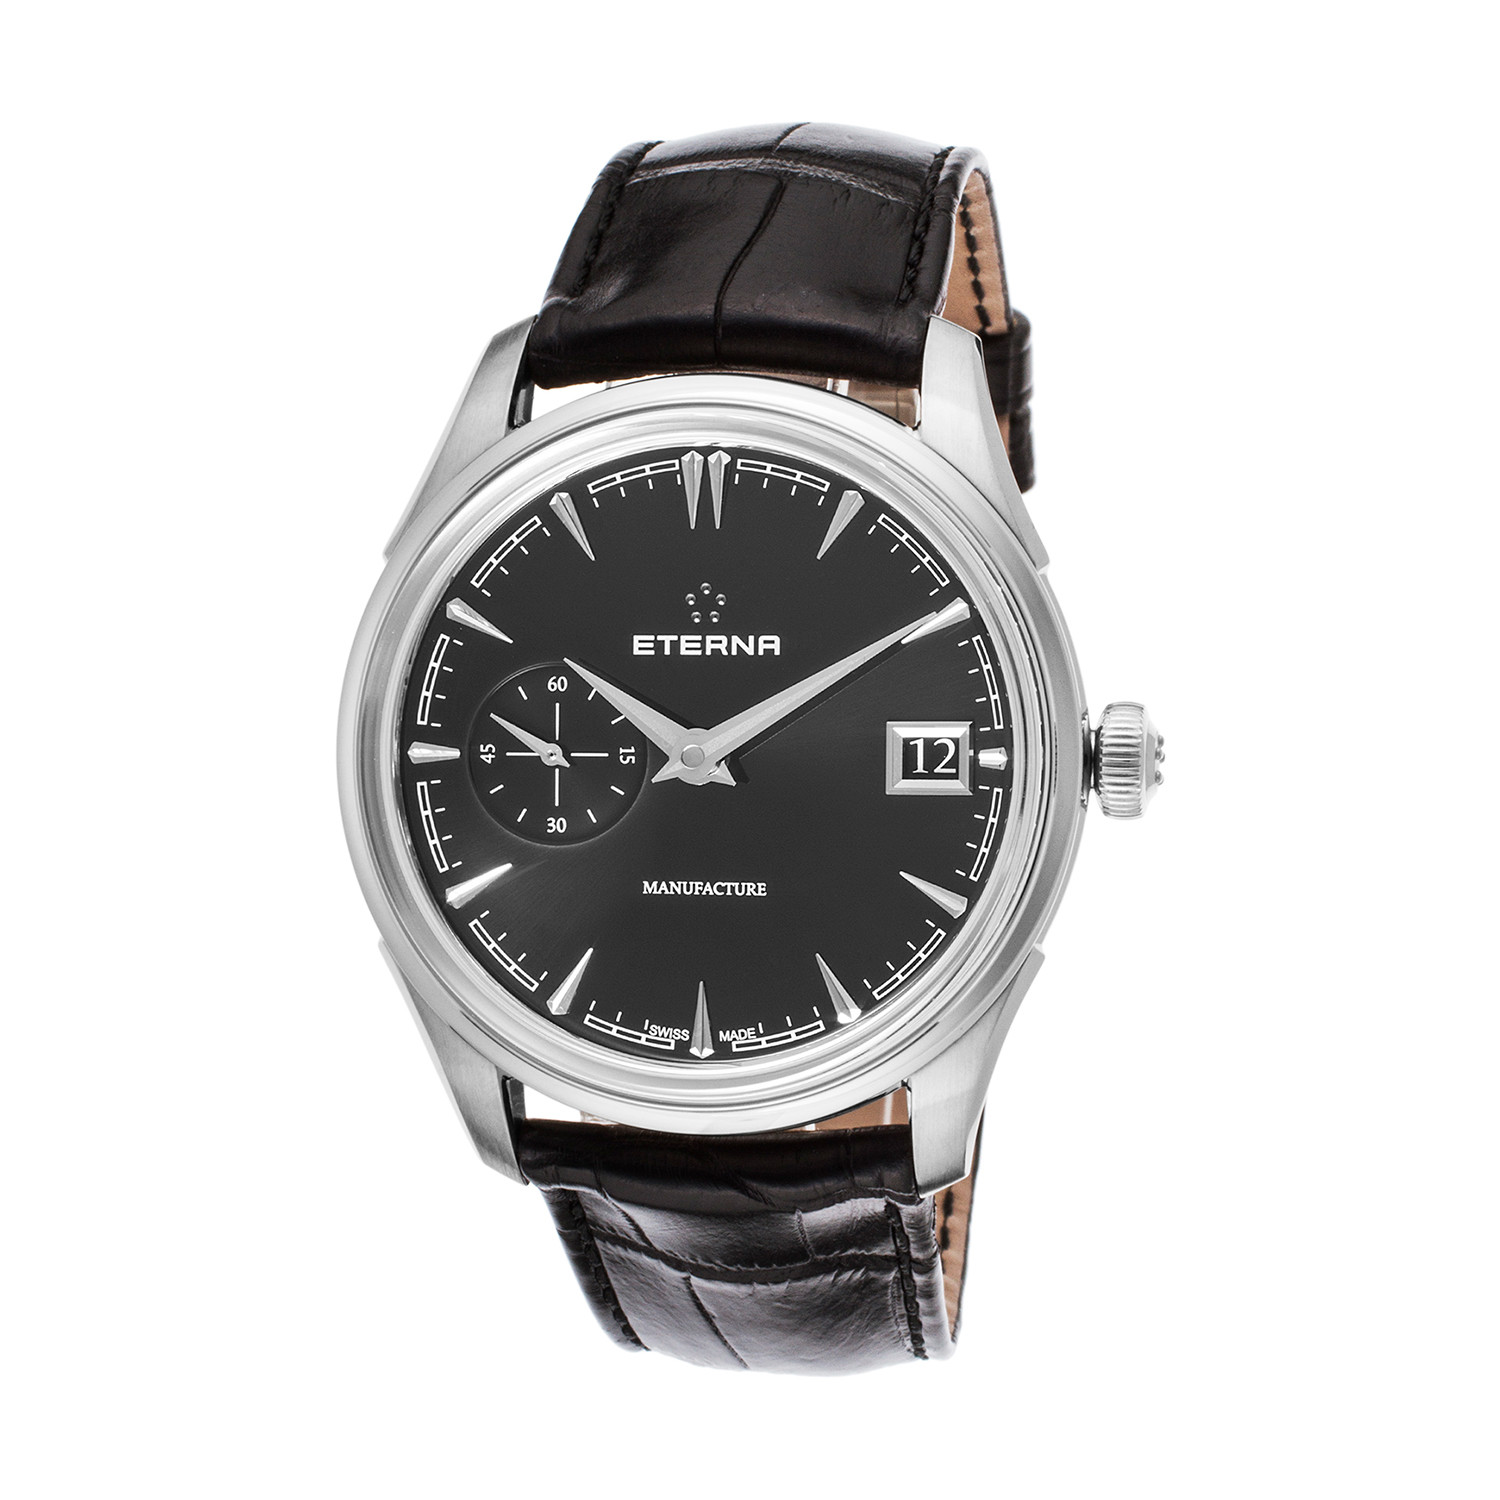 Eterna 1948 Legacy Automatic // 7682-41-40-1321 - Exalted Watches ...